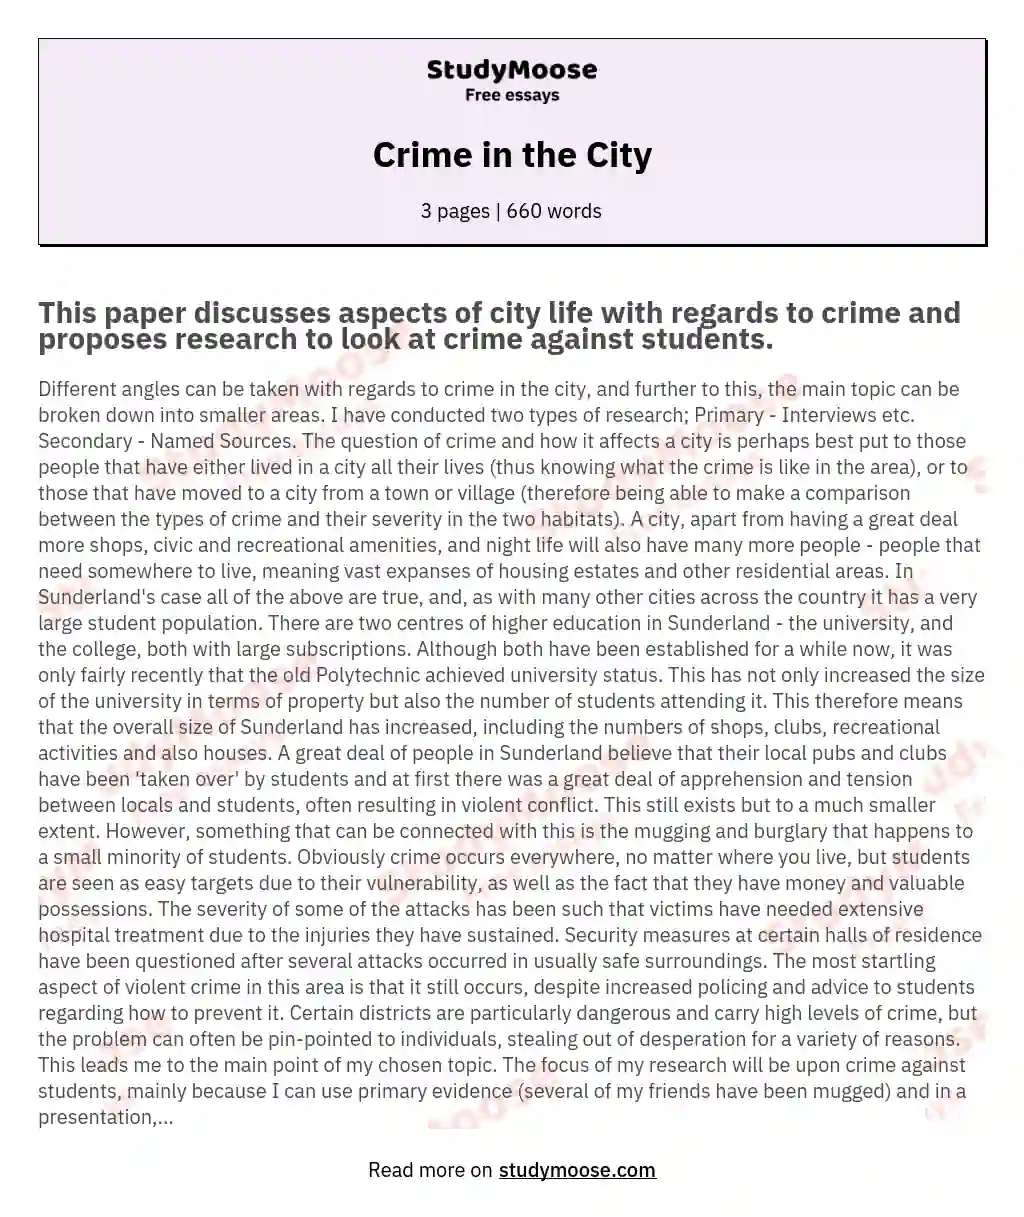 Crime in the City essay